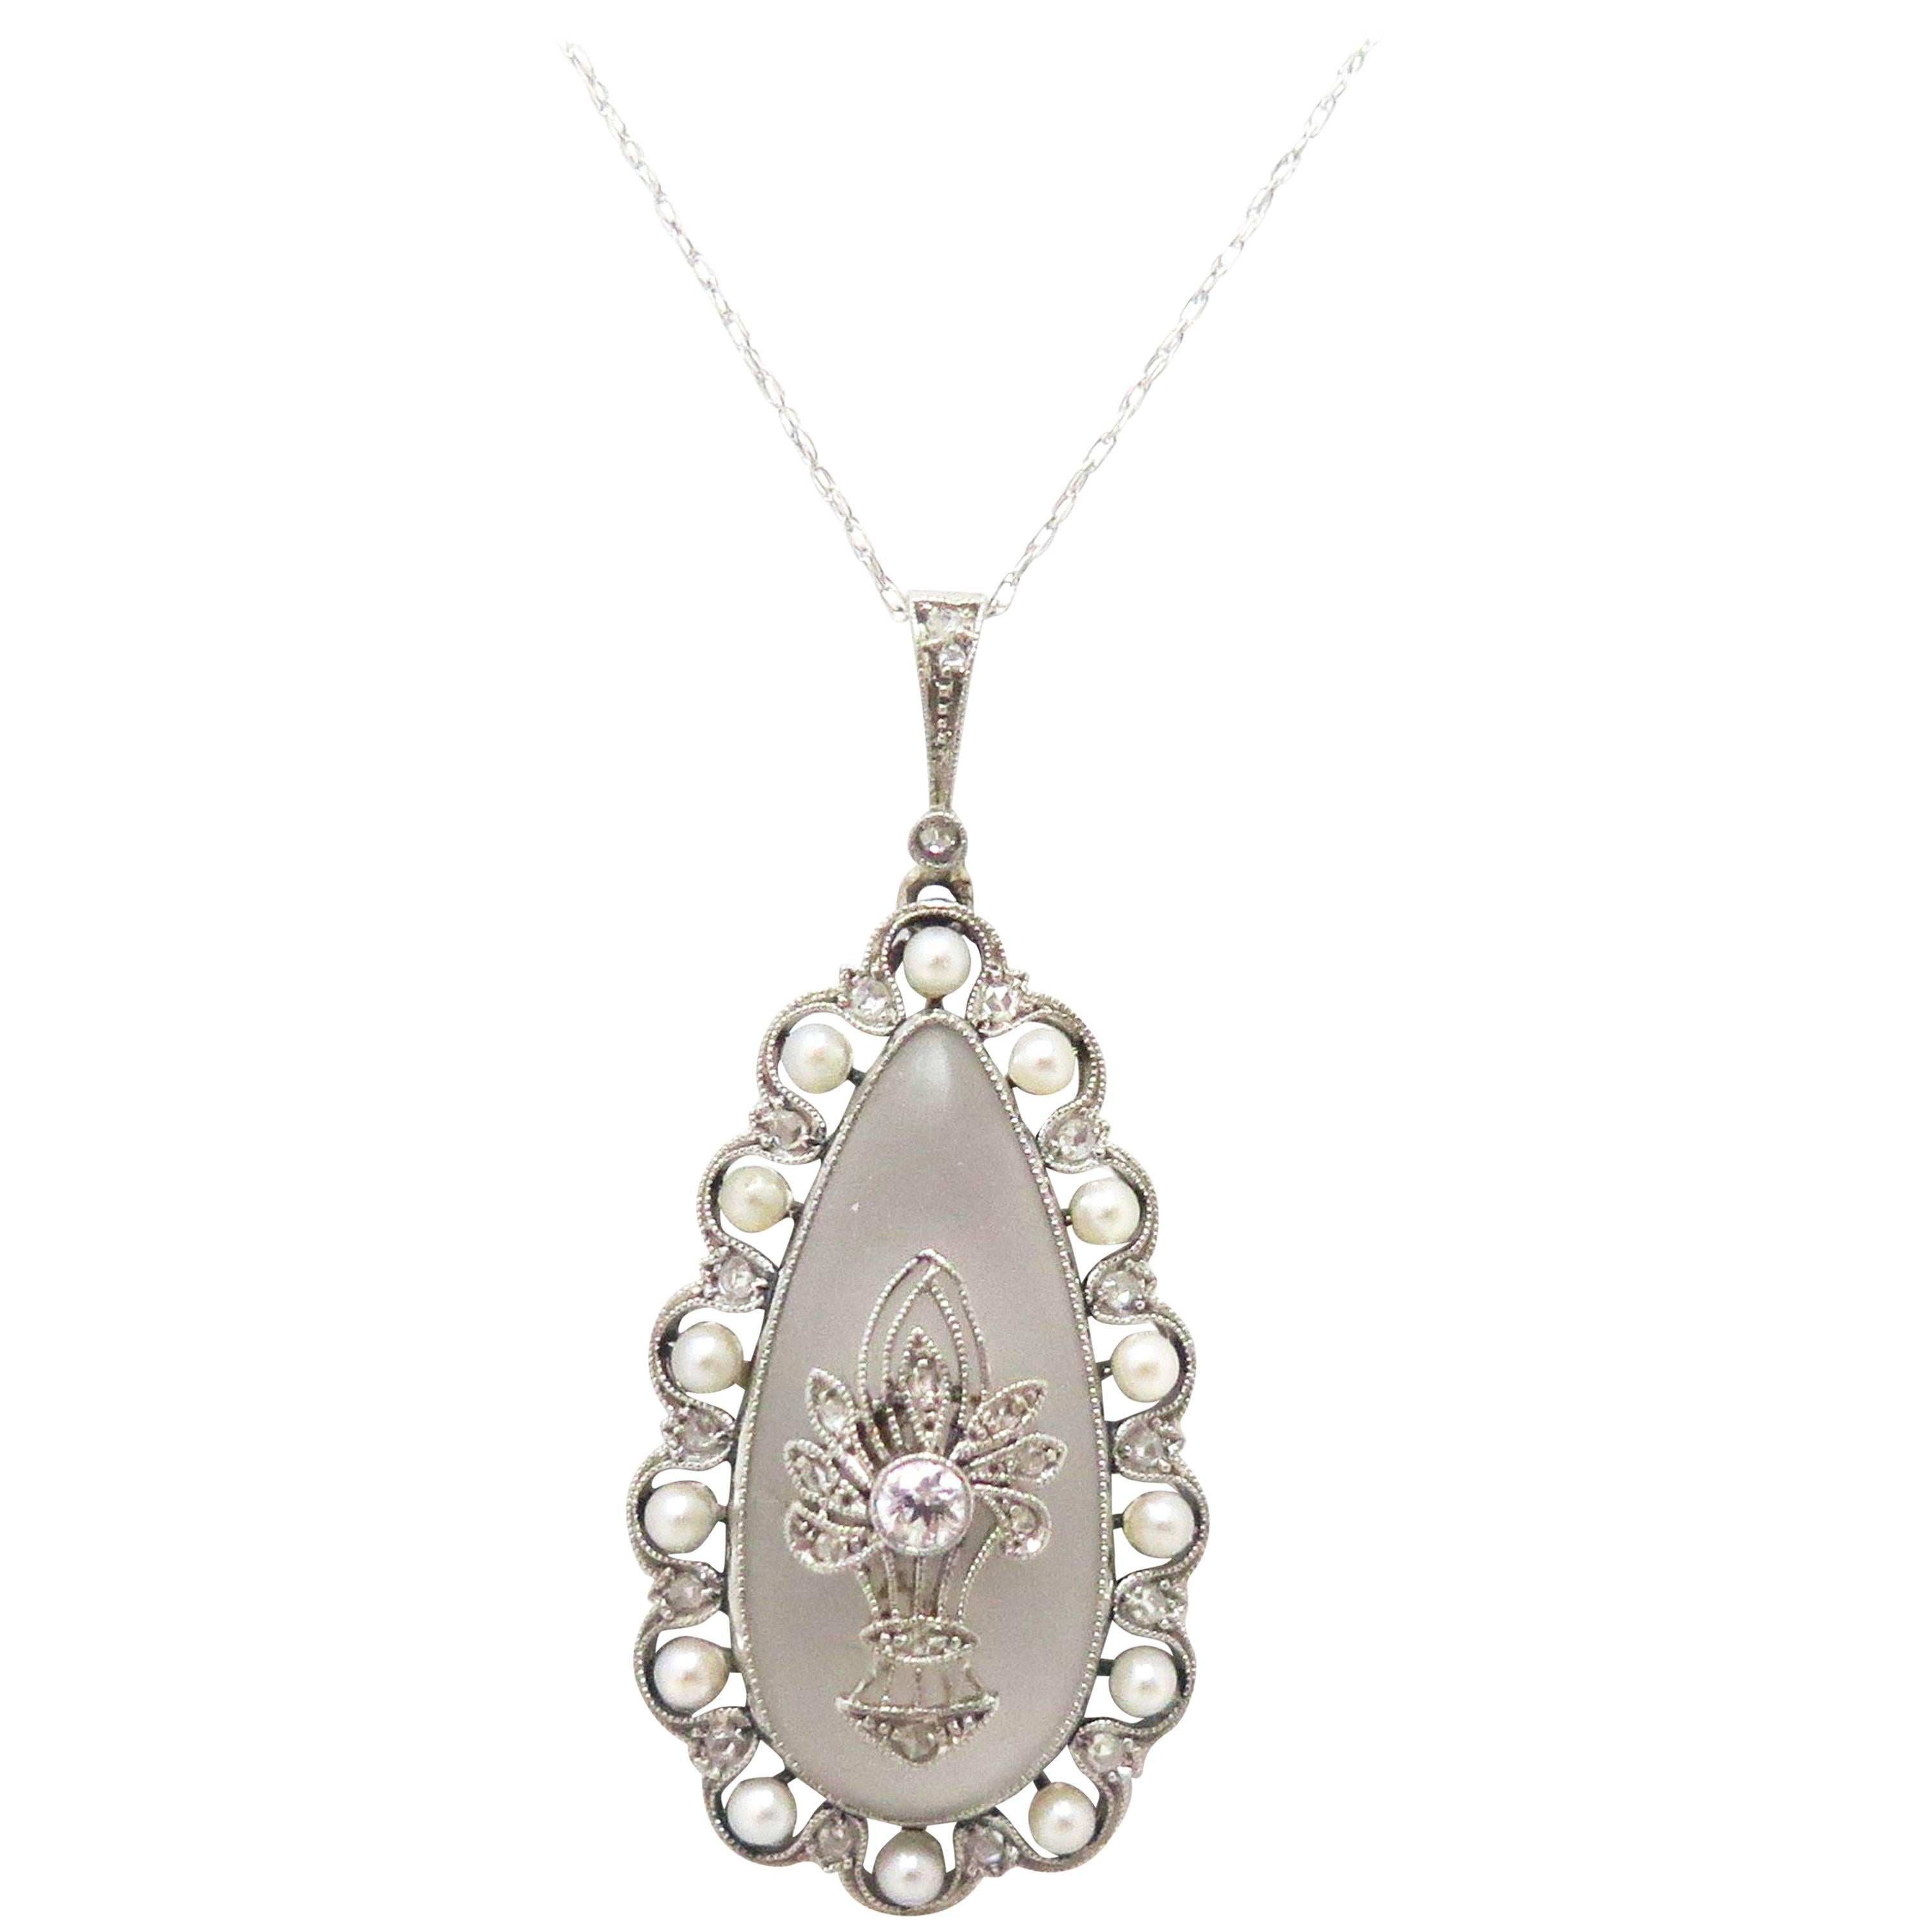 This stunning, Platinum and Diamond pendant with a frosted rock quartz crystal pear shaped plaque has a basket-like motif center. The basket has a bezel set Old European Cut Diamond, and 9 Rose Cut Diamonds inside leaf like settings around it.